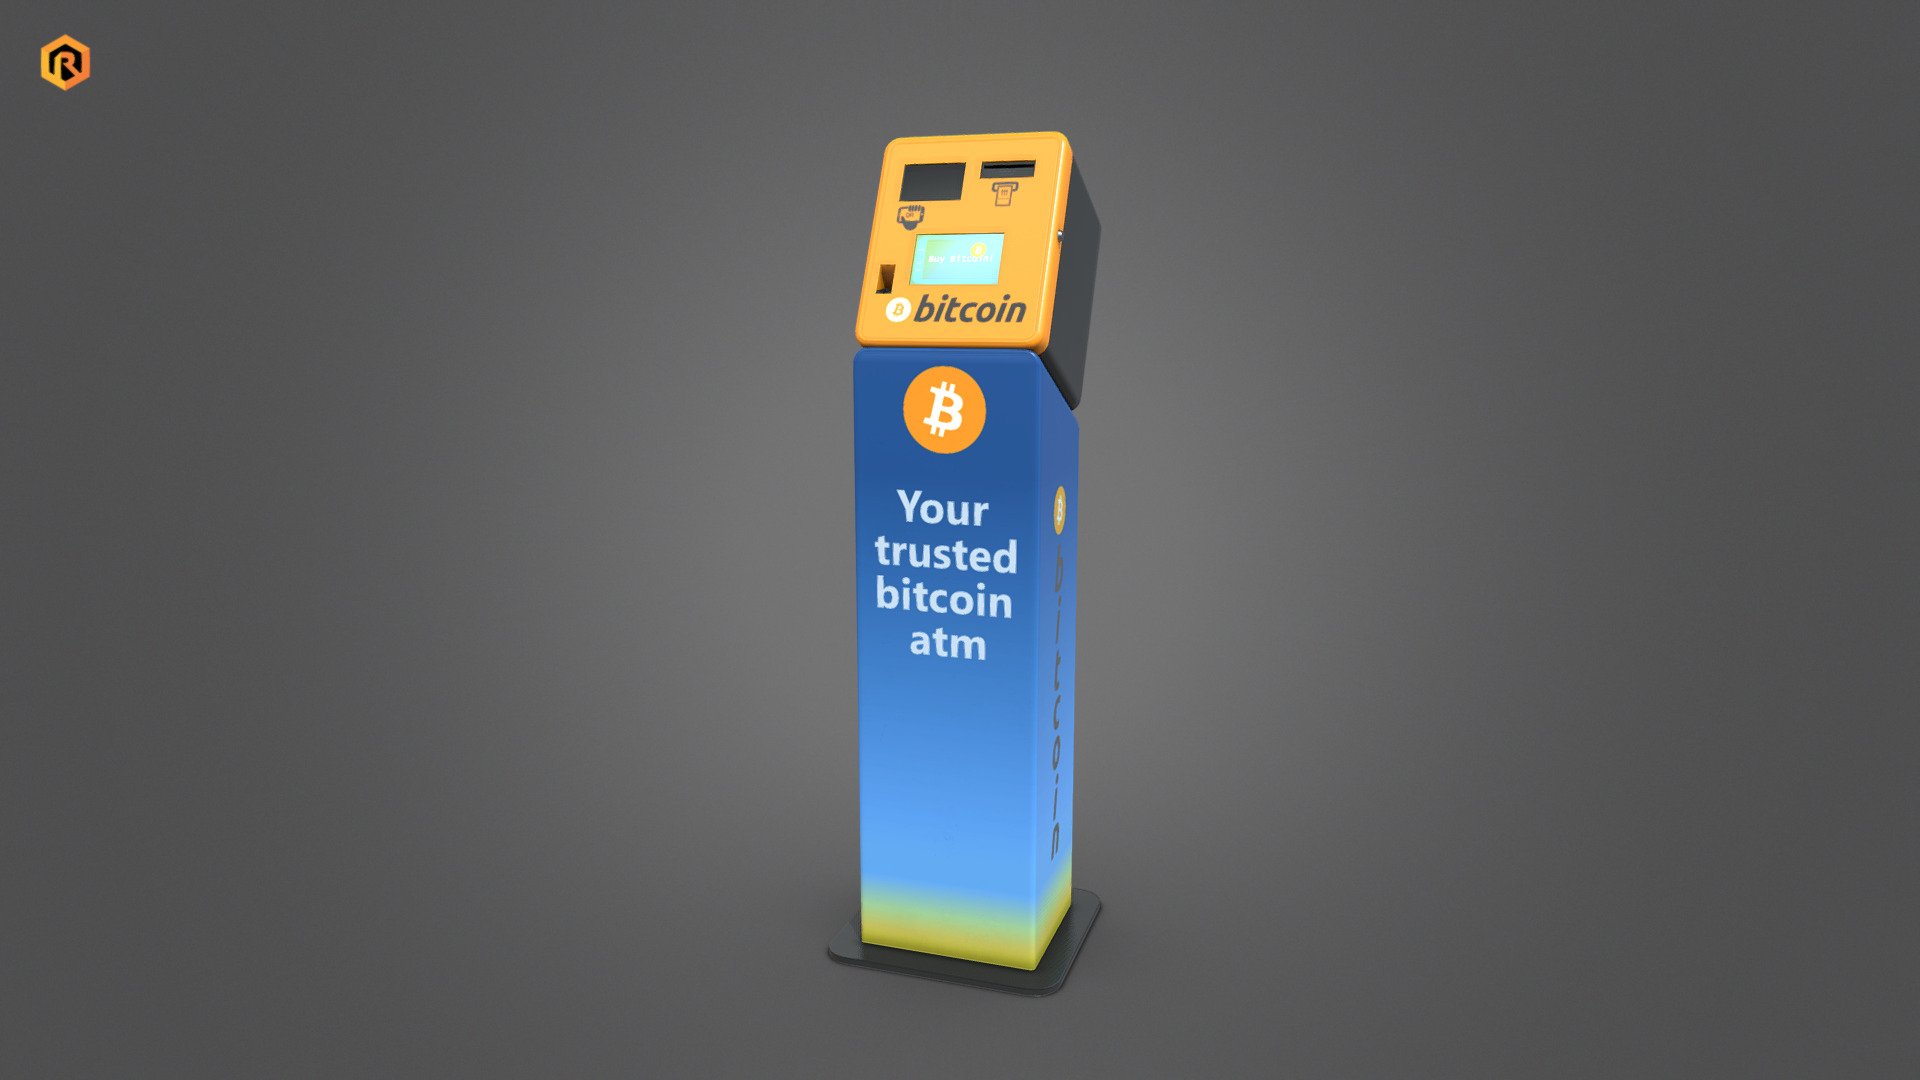 Low-Poly PBR 3D model of Bitcoin ATM Machine.

It is best for use in games and other VR / AR, real-time applications such as Unity or Unreal Engine.

It can also be rendered in Blender or using Vray as the model is equipped with all required PBR textures.  

This is a PRO edition of this 3D model and includes source files for Substance Painter, 

low &amp; hi-res Blender source files, Blender Eeevee &amp; Cycles studio render setup, MT4 render setup, Unity, UE4, Maya and many more    

You can download regular version for free here: https://skfb.ly/o98Ax

Technical details:   


3 PBR textures sets 
(4096 Main Body, 1024 Emission and 512 Glass)   
1262 Triangles
1038  Vertices  
Model is one mesh
Lot of additional file formats, source files and other PRO goodies included.  

Please feel free to contact me if you have any questions or need any support for this asset.

Support e-mail: support@rescue3d.com - Bitcoin ATM - PRO Edition - Buy Royalty Free 3D model by Rescue3D Assets (@rescue3d) 3d model